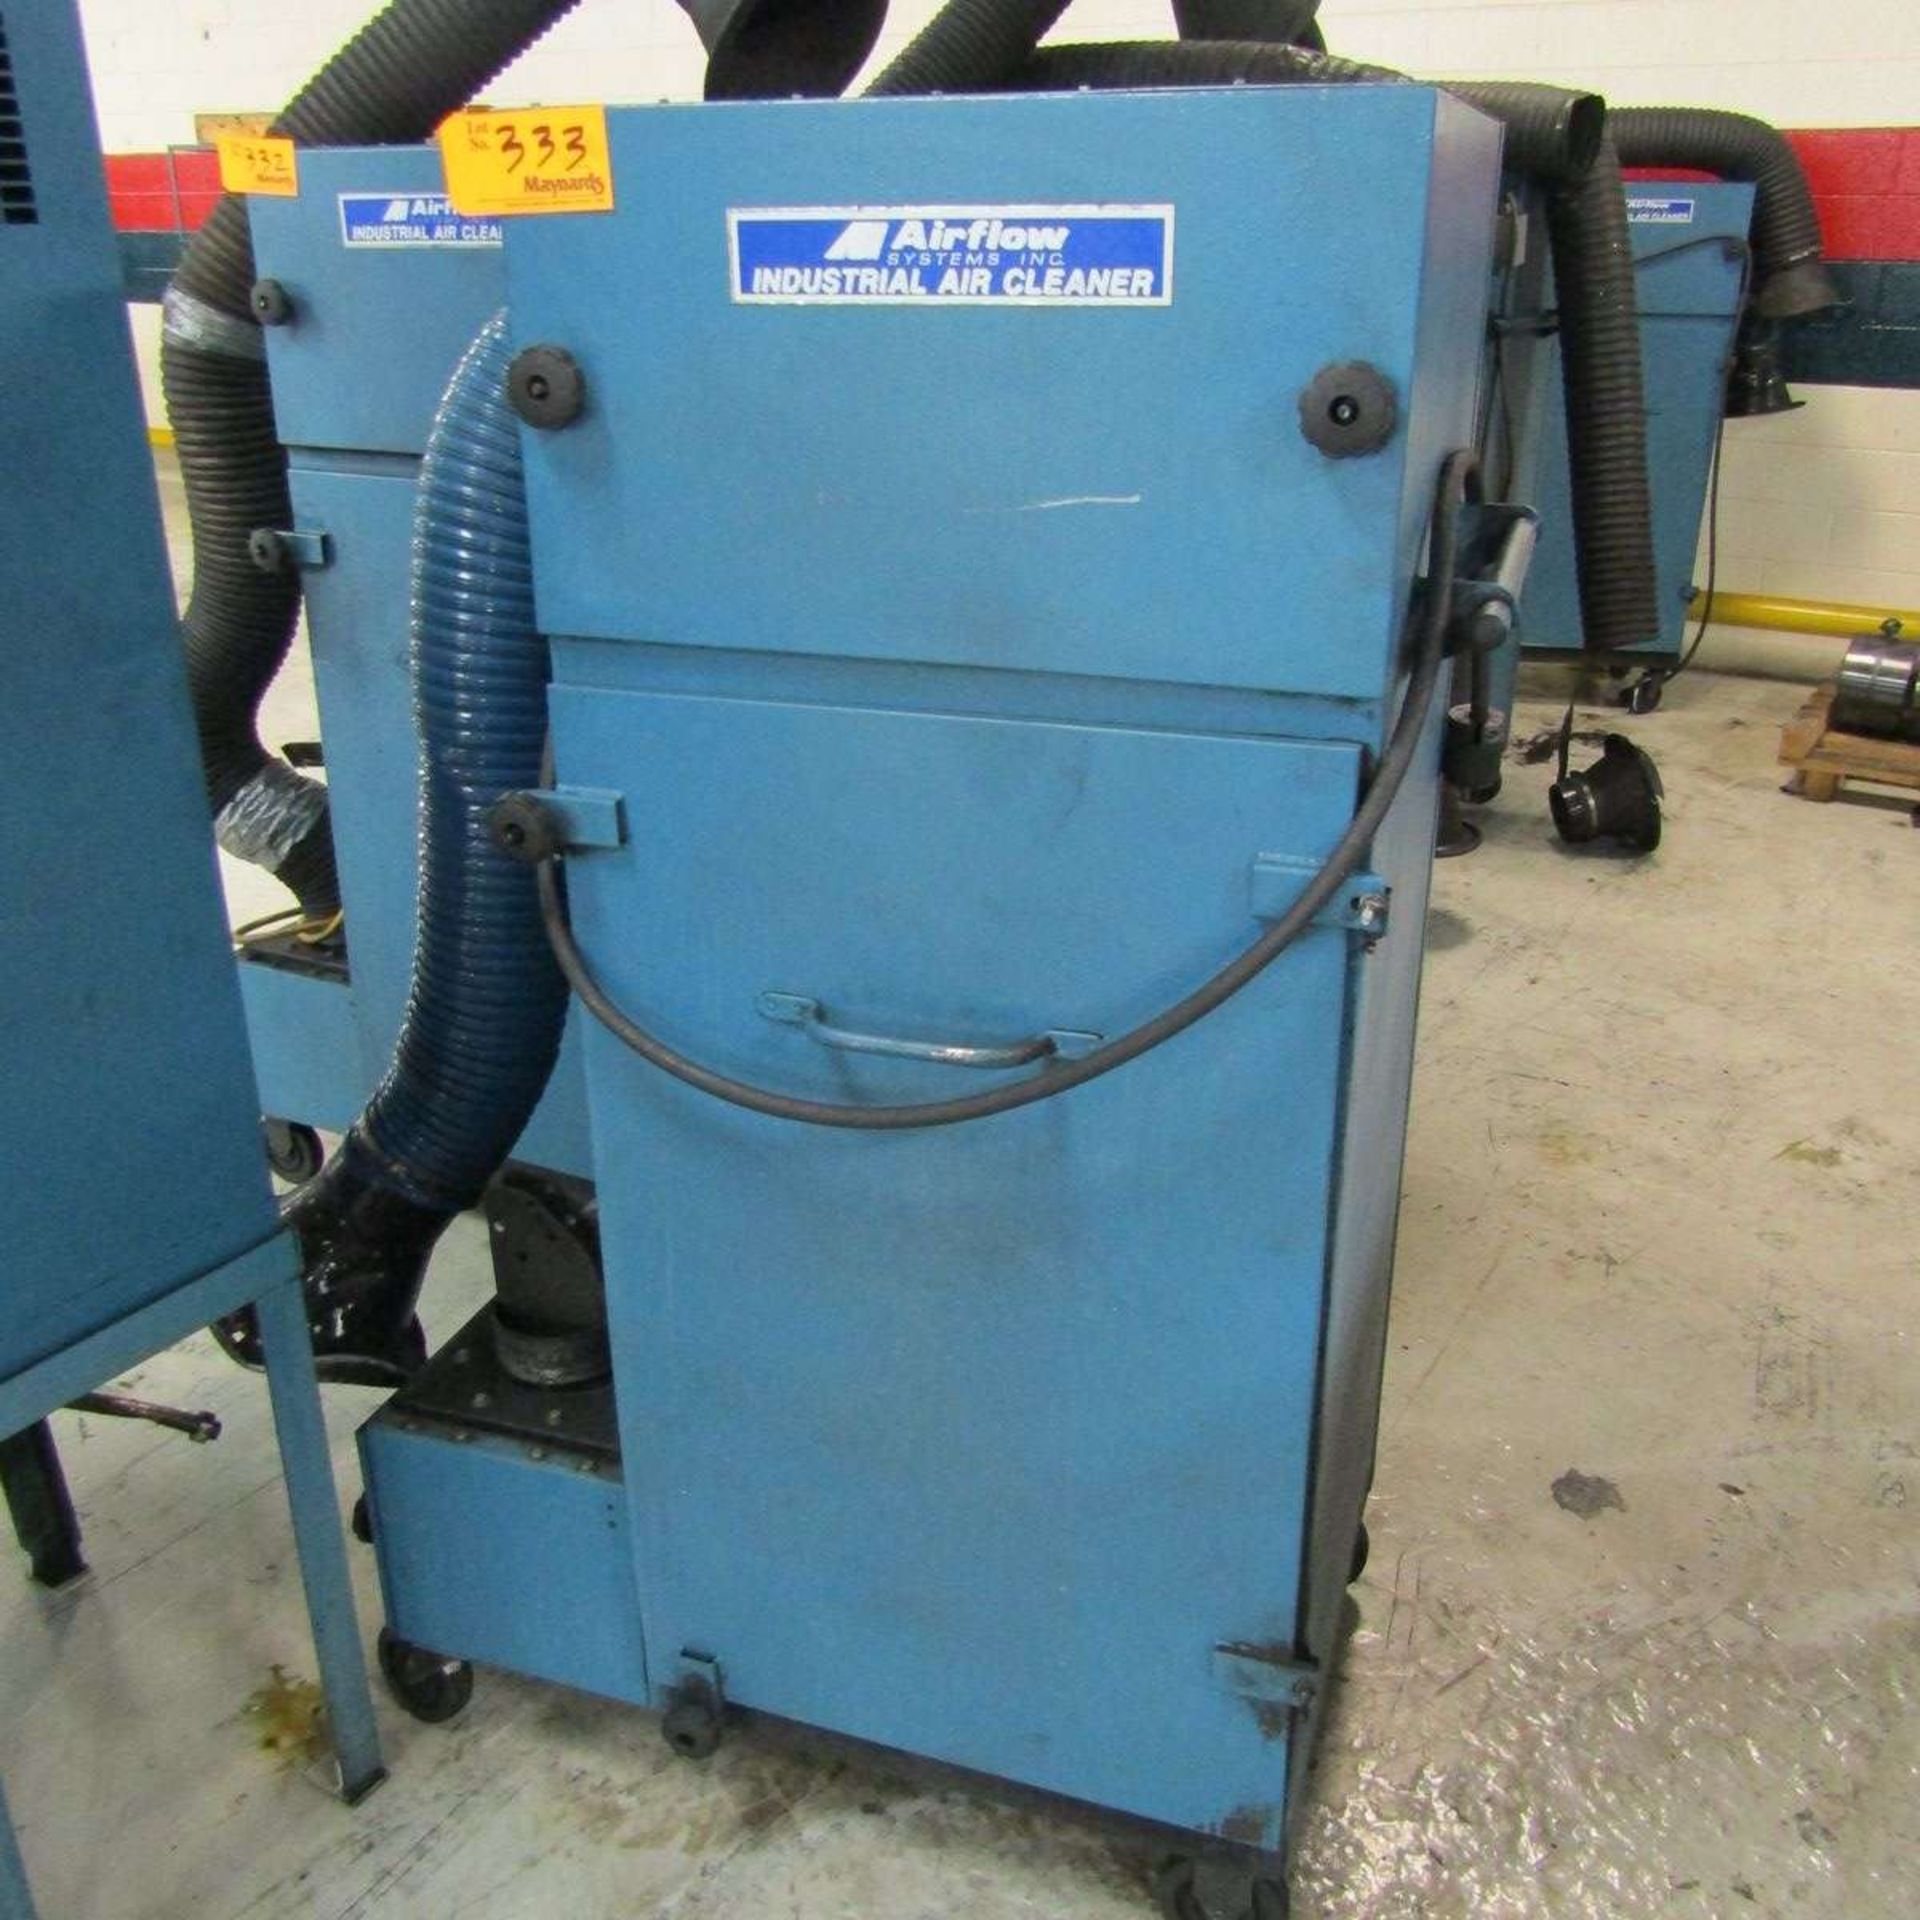 Air Flow Systems Dust Collector